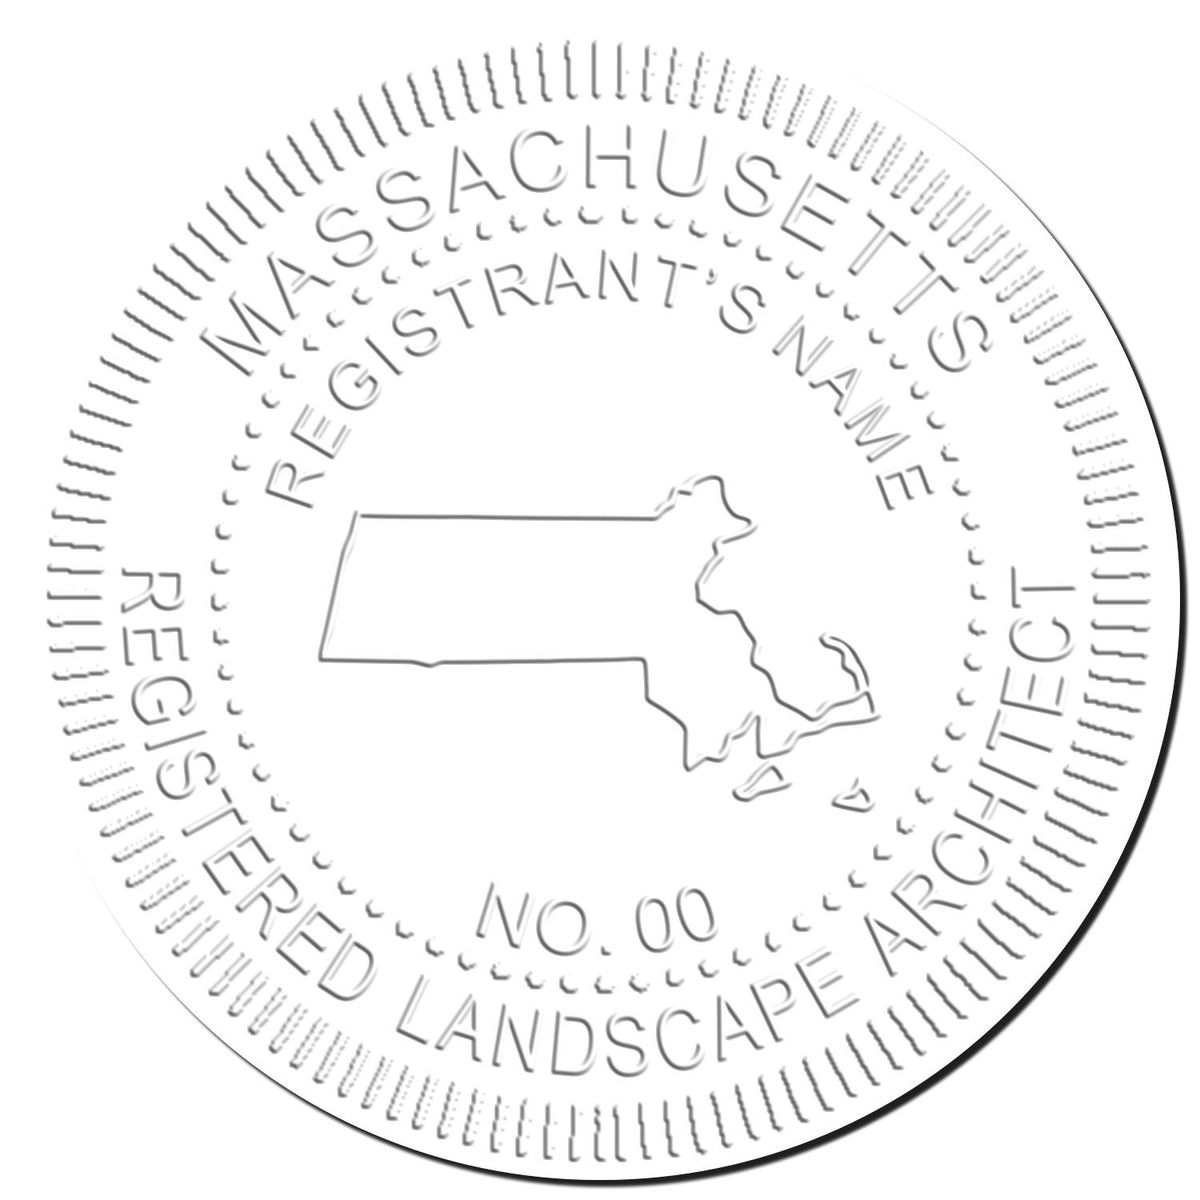 This paper is stamped with a sample imprint of the Hybrid Massachusetts Landscape Architect Seal, signifying its quality and reliability.